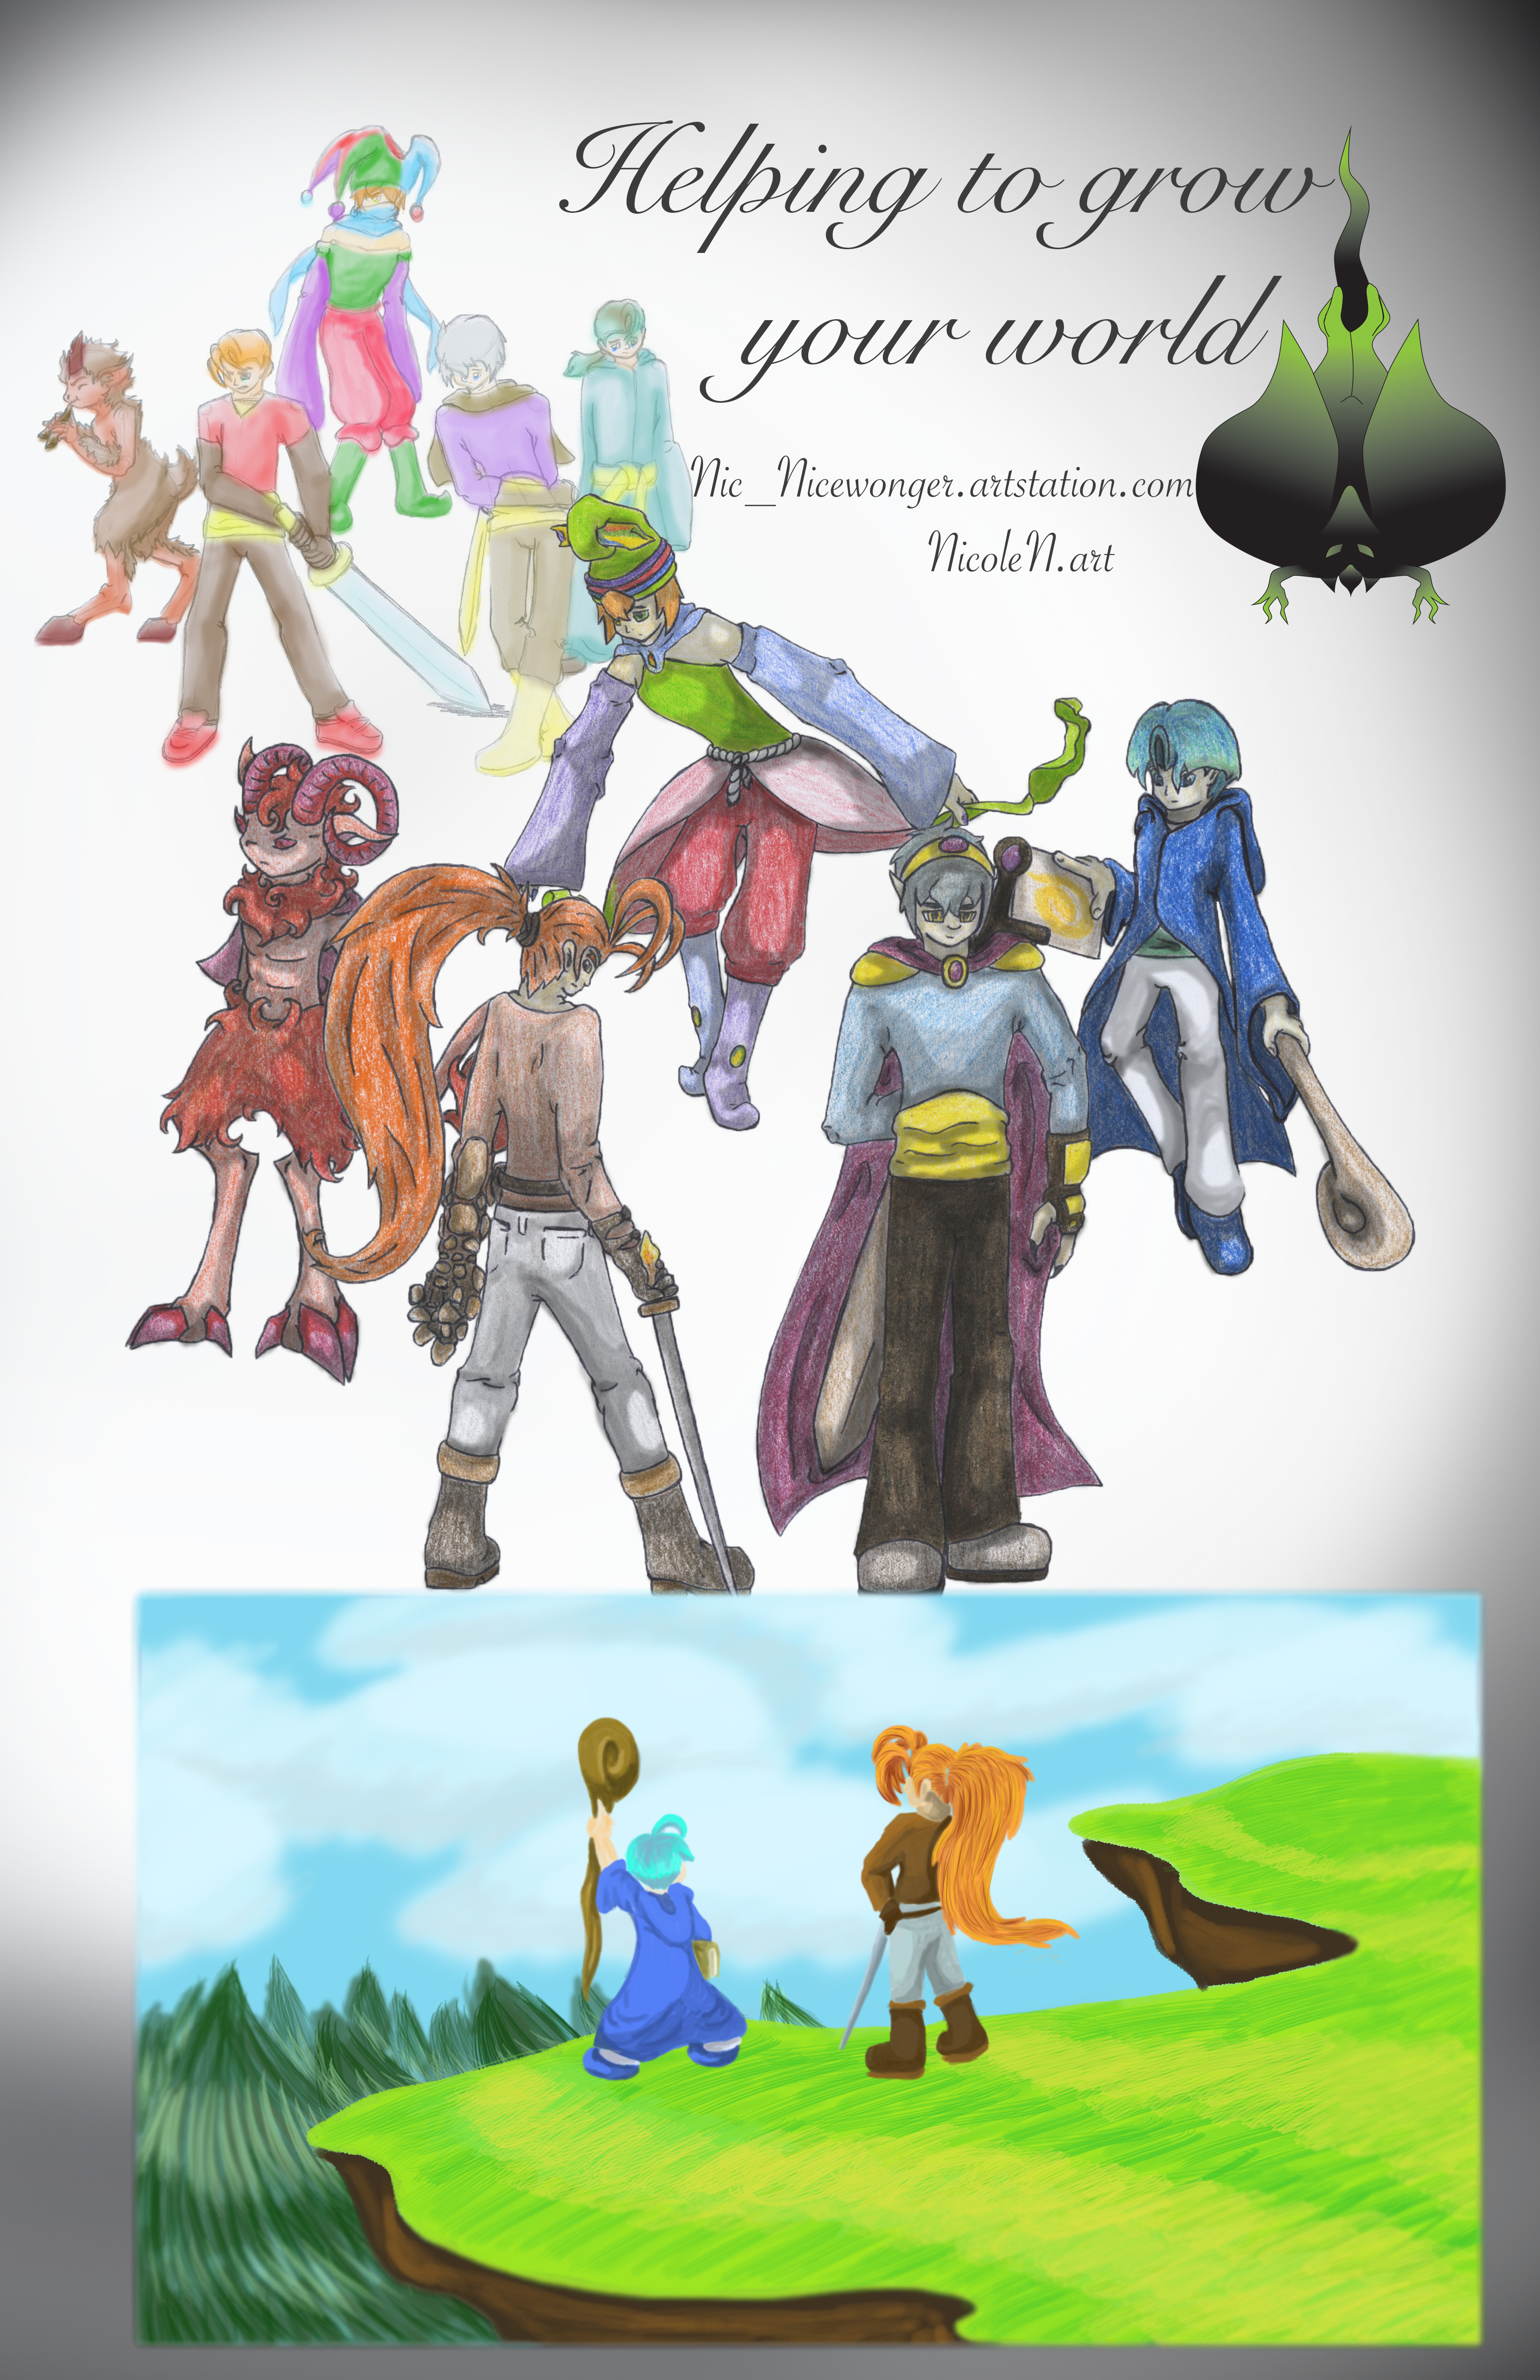 A collection of my characters, shown as original designs, finite designs, and a concept of the "in game" art style all in one poster.
Done tradigitally, as I call it. I utilized both unshaded hand drawings and Photoshop to shade and paint this.